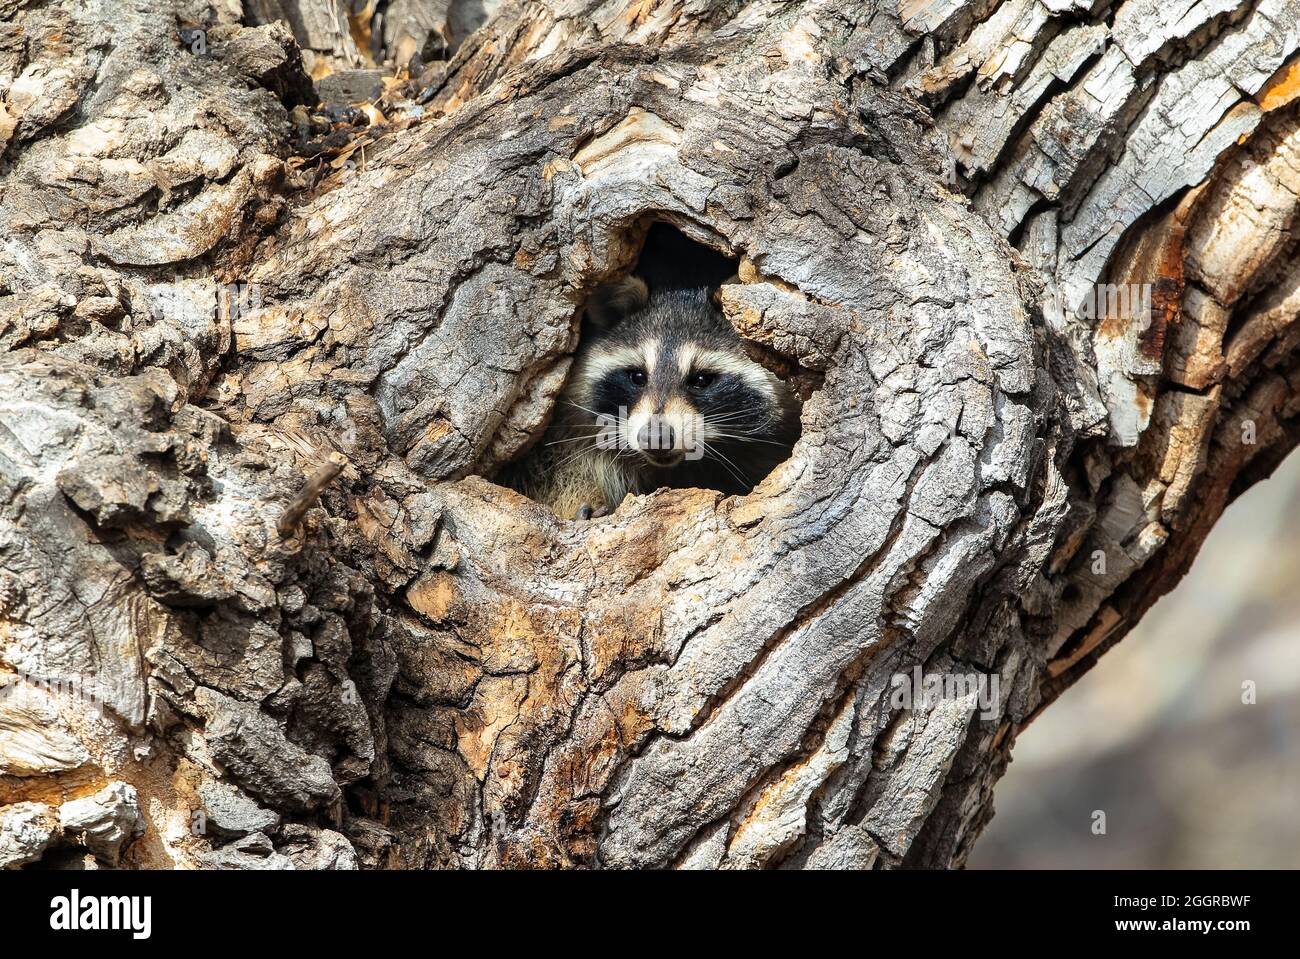 A Raccoon peers out of a hole in a large tree in the daytime. Stock Photo